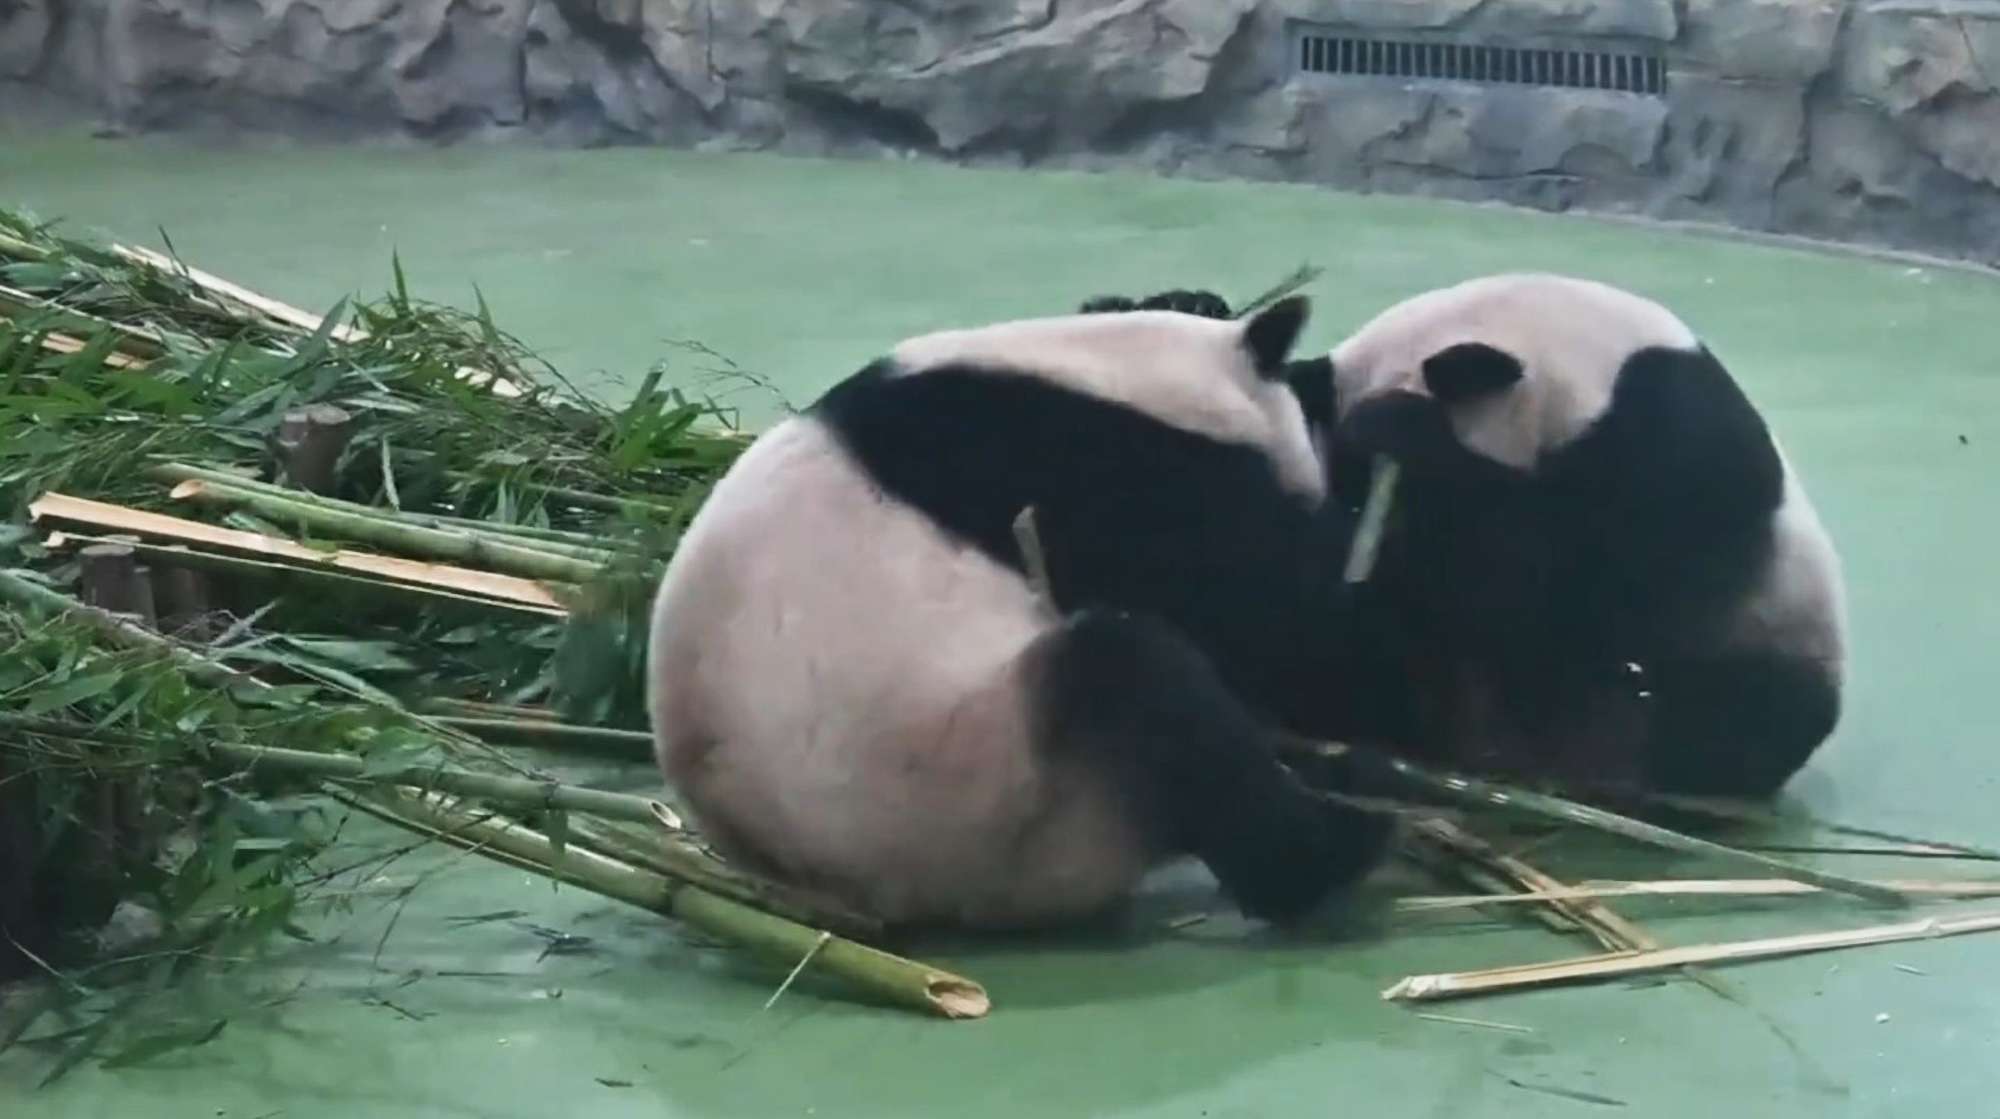 Two Startled Pandas Bump Heads Leaping Into Defensive Position